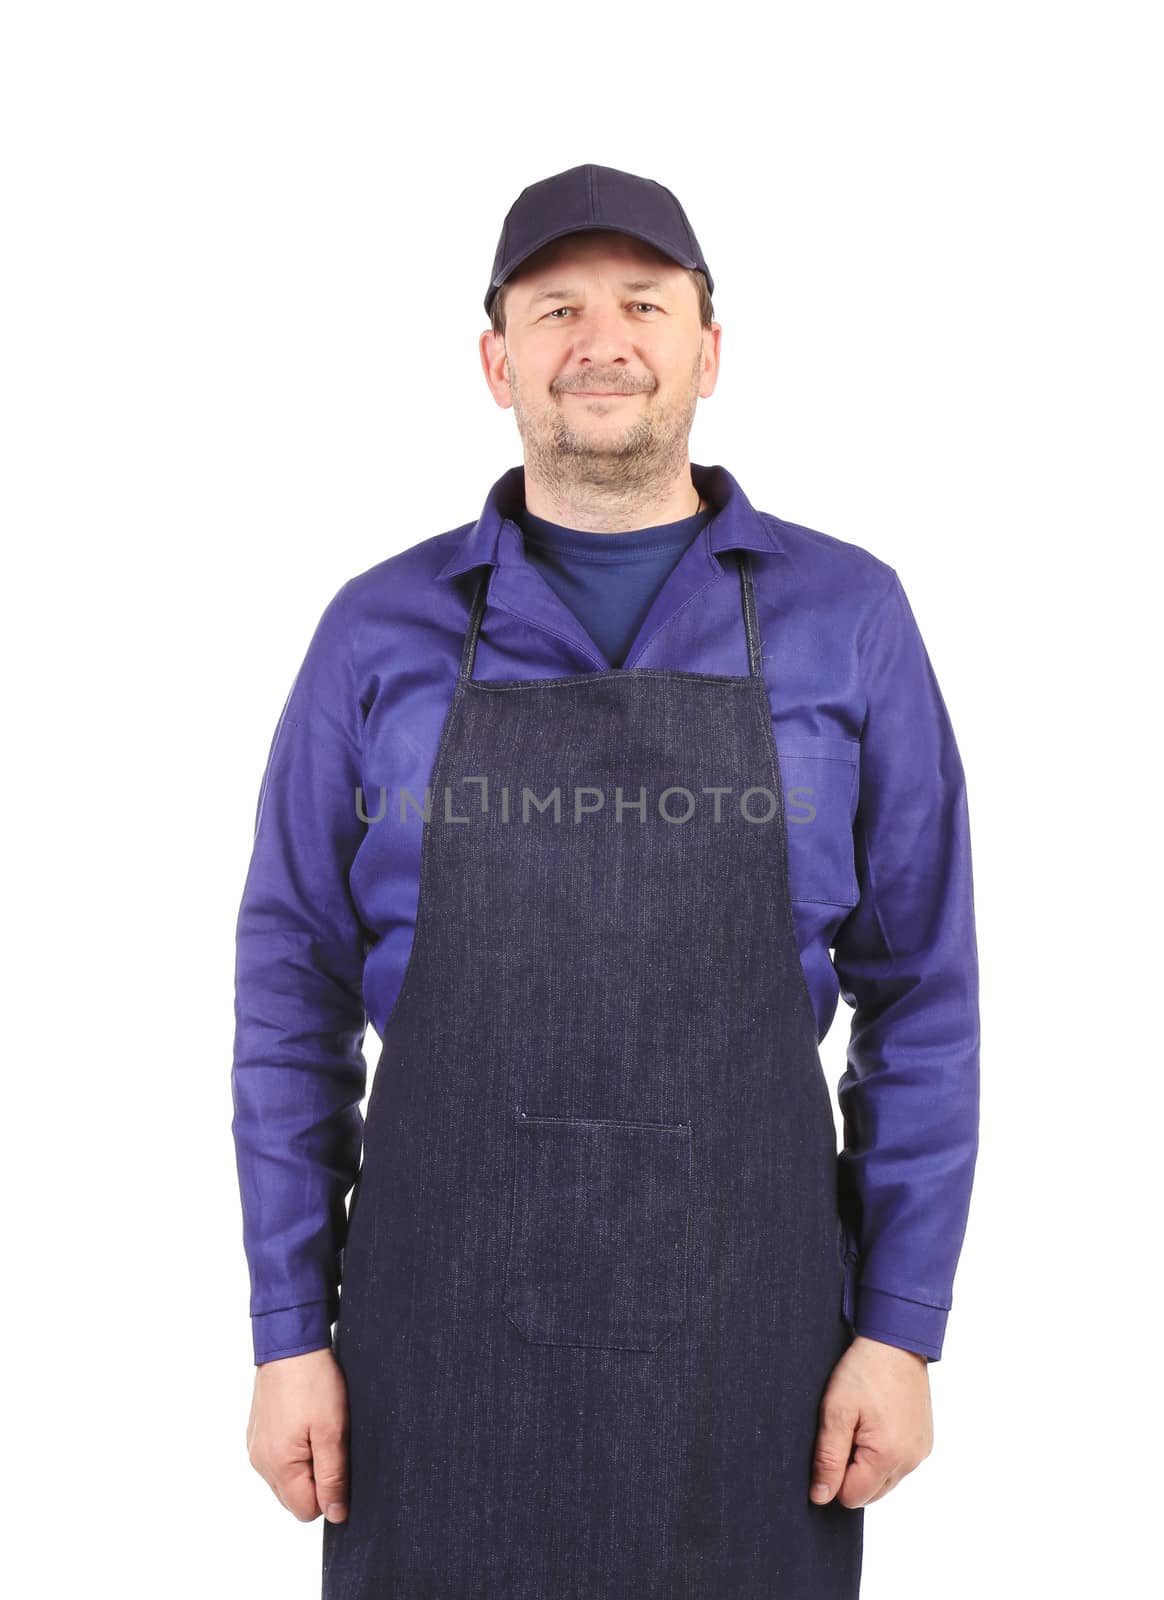 Smiling man dressed in apron. Isolated on a white background.